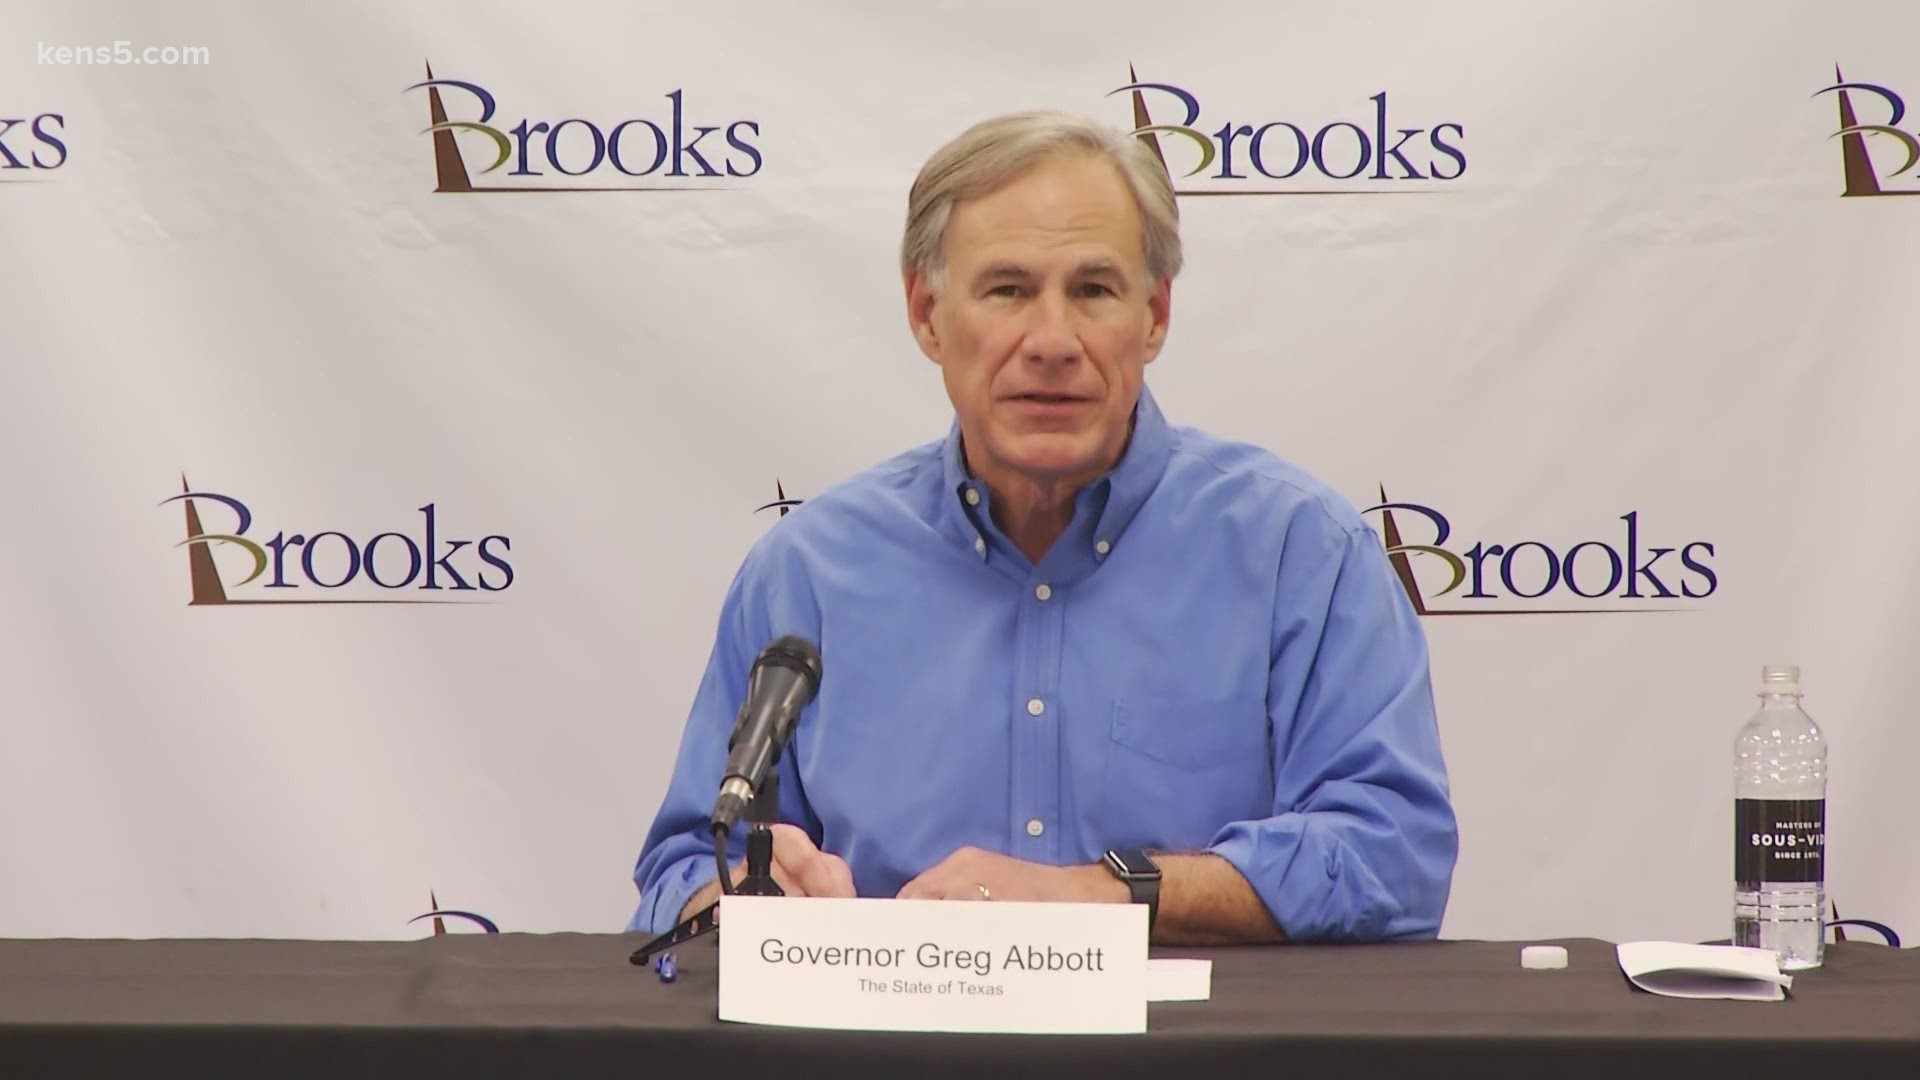 Governor Greg Abbott met with small business leaders and construction workers on how Texas can be more supportive in the wake of COVID-19.